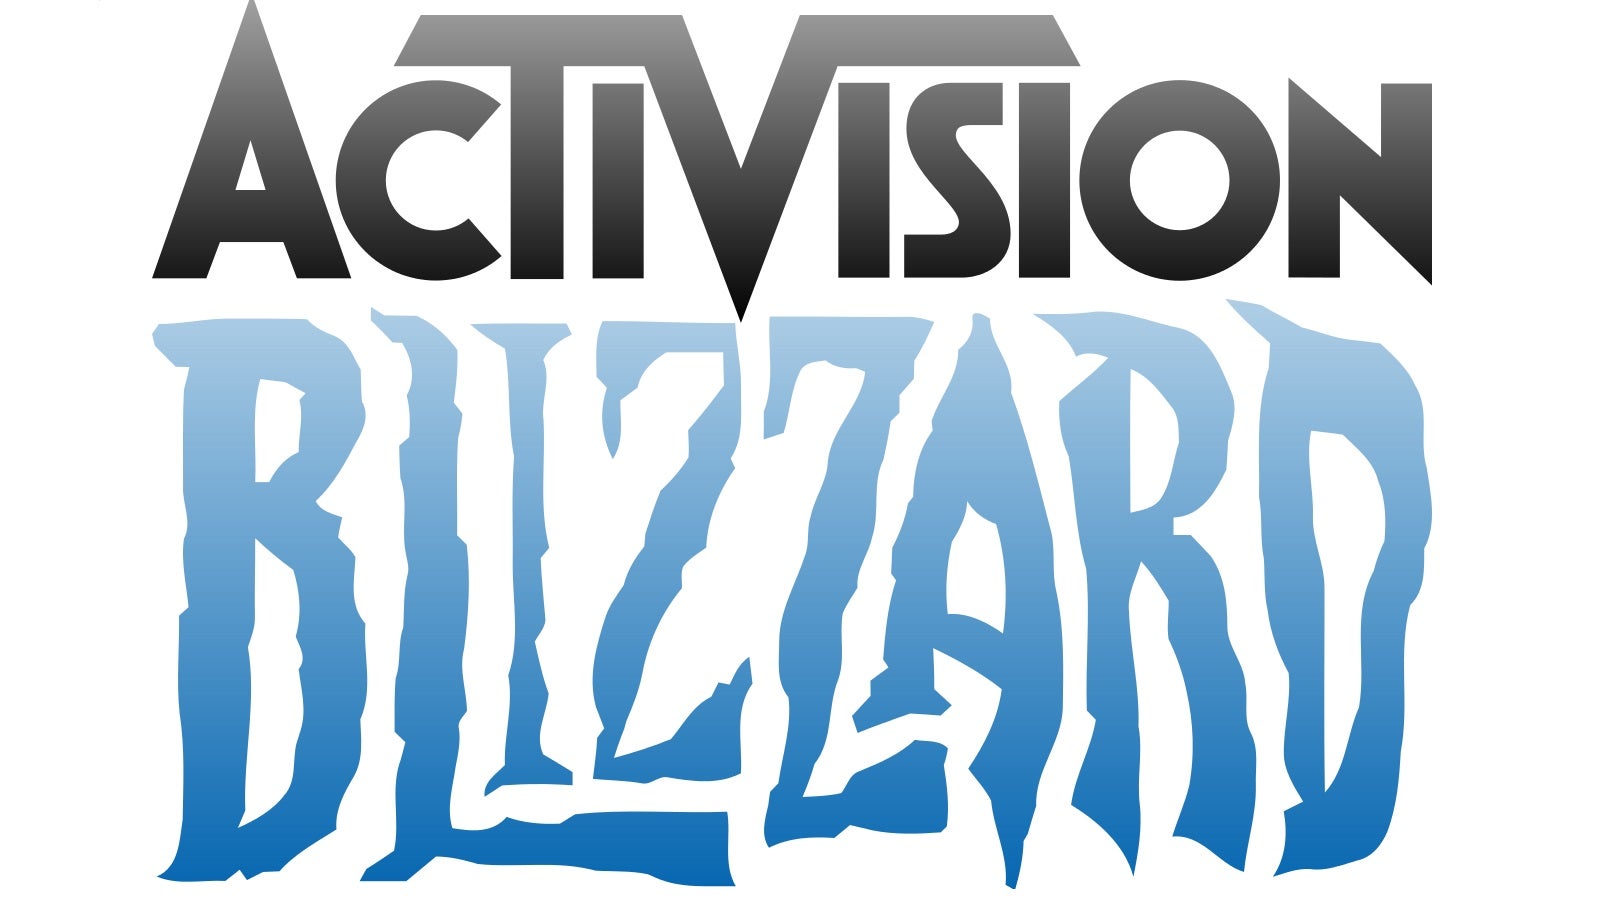 Activision Blizzard CEO Bobby Kotick is re-elected to the board for another year thumbnail